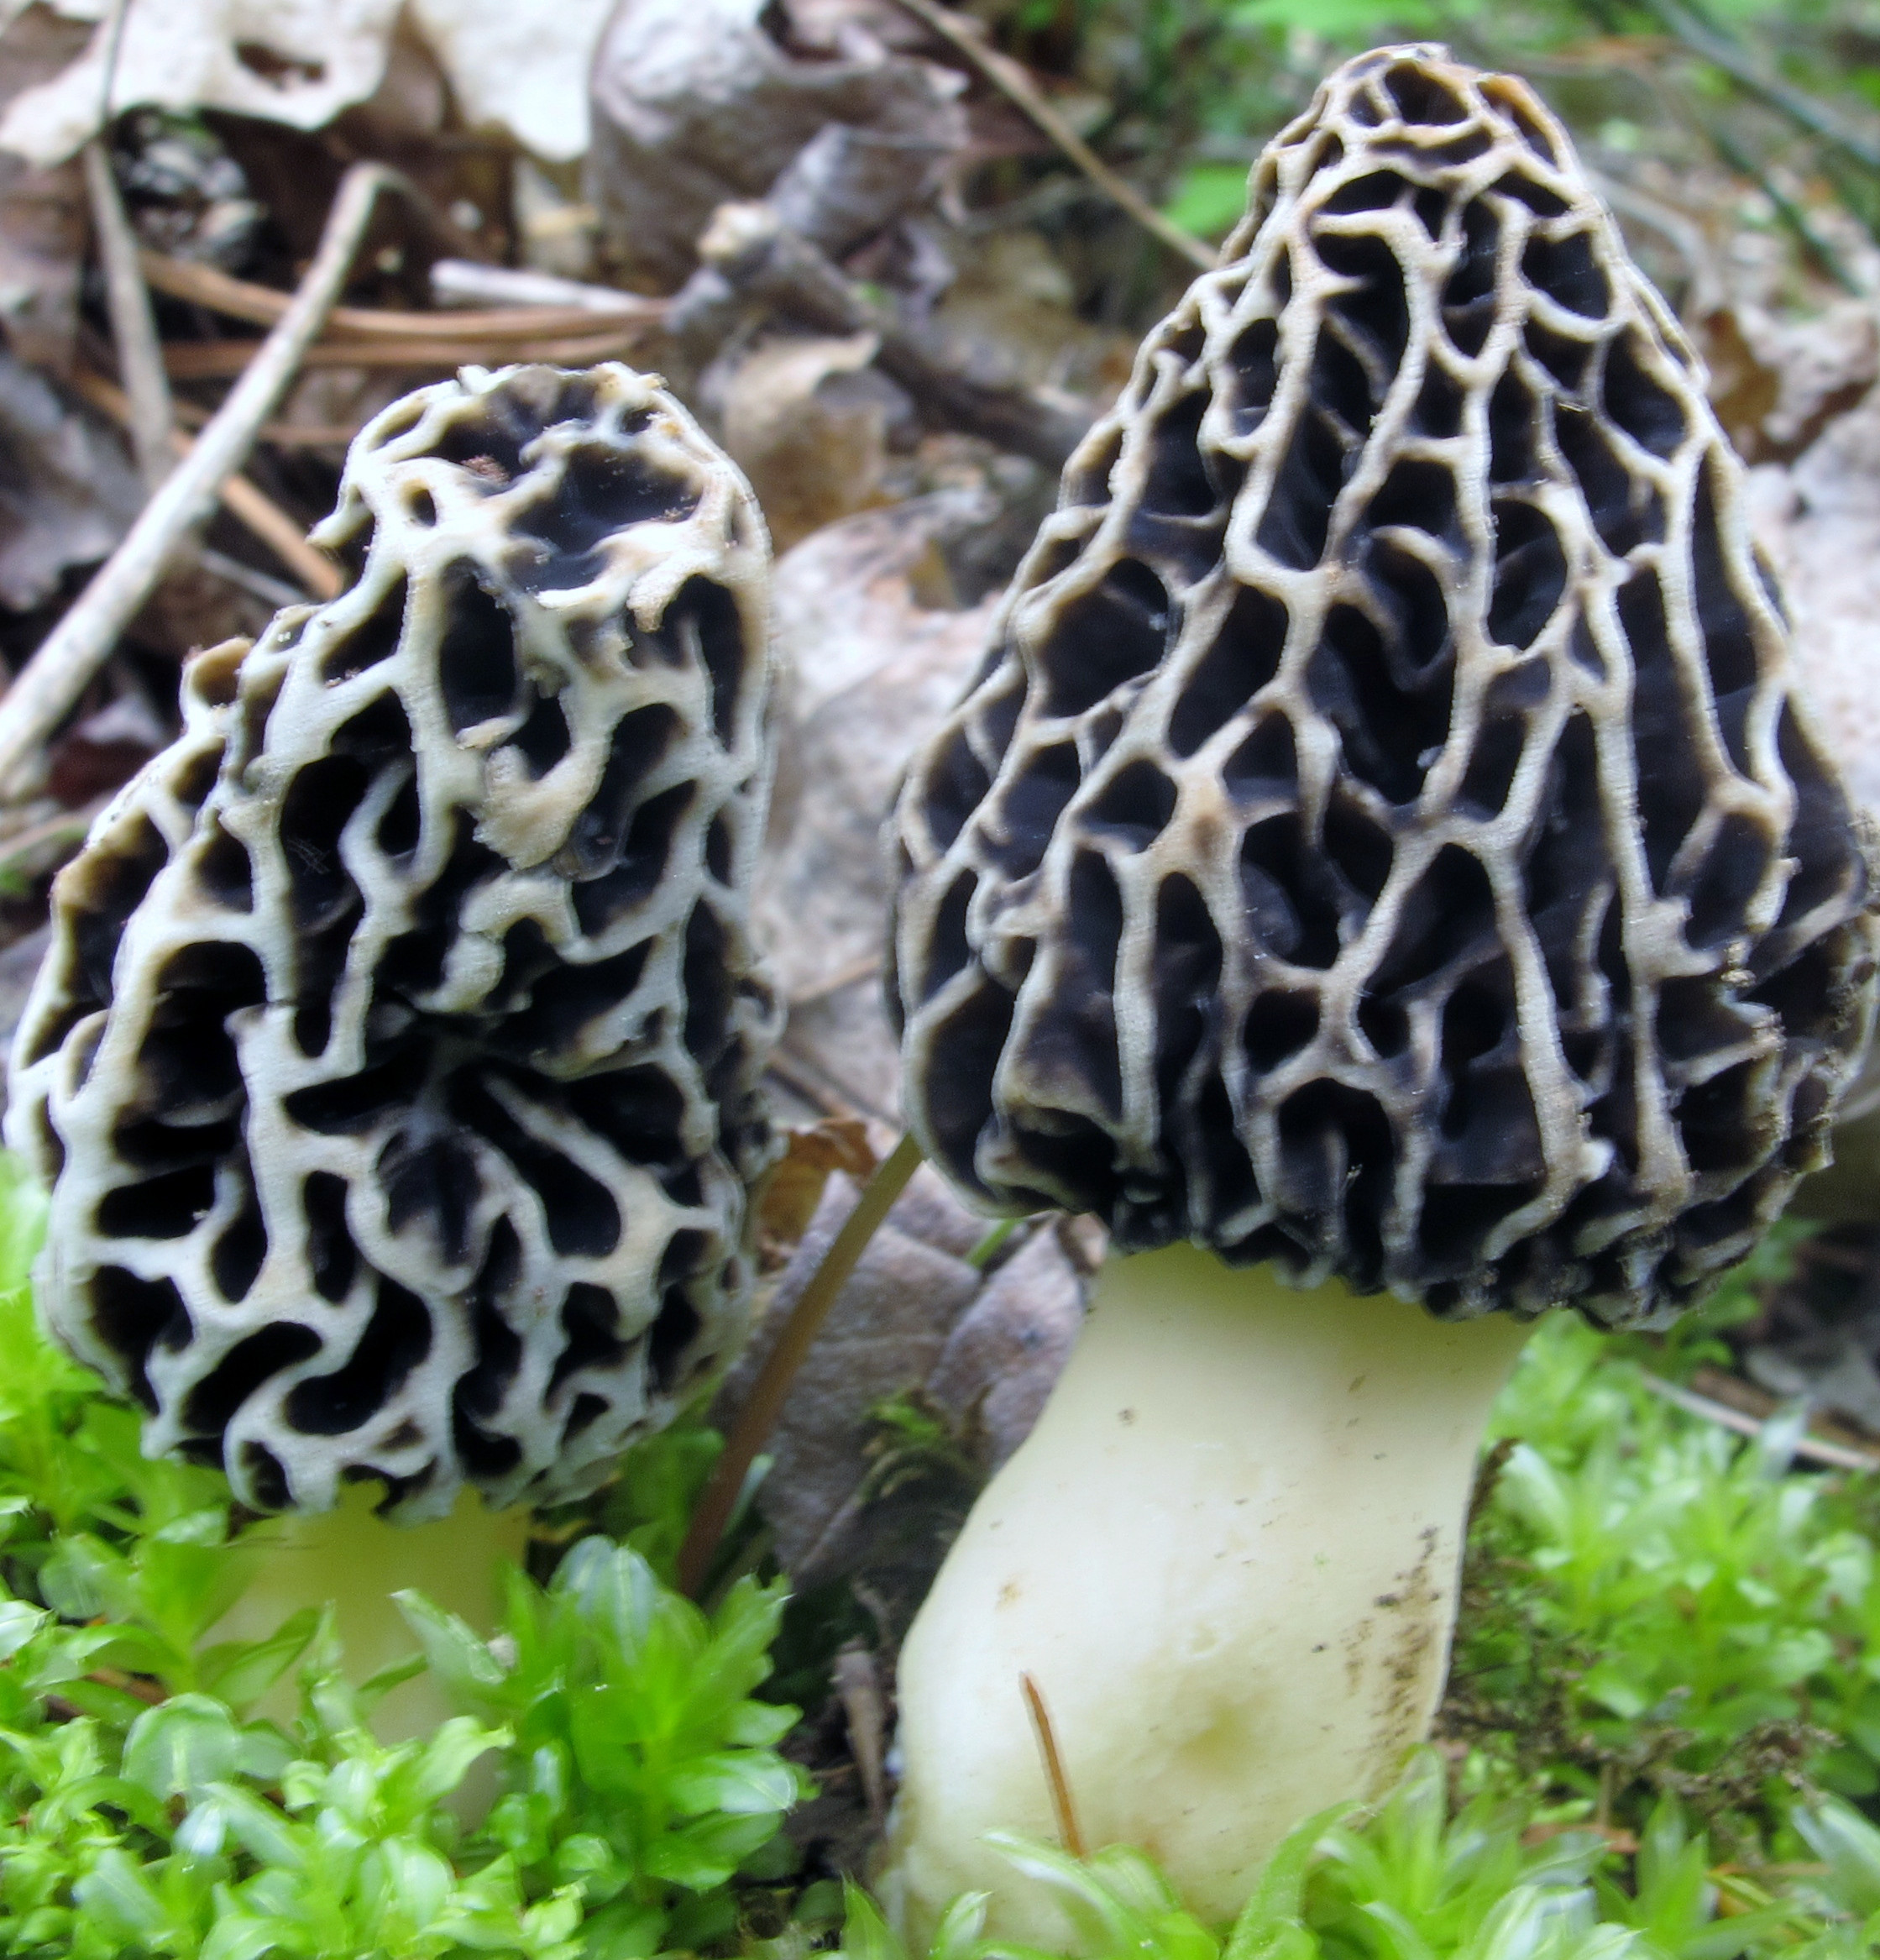 Photos Of Morel Mushrooms
 Morels and How to Find Them